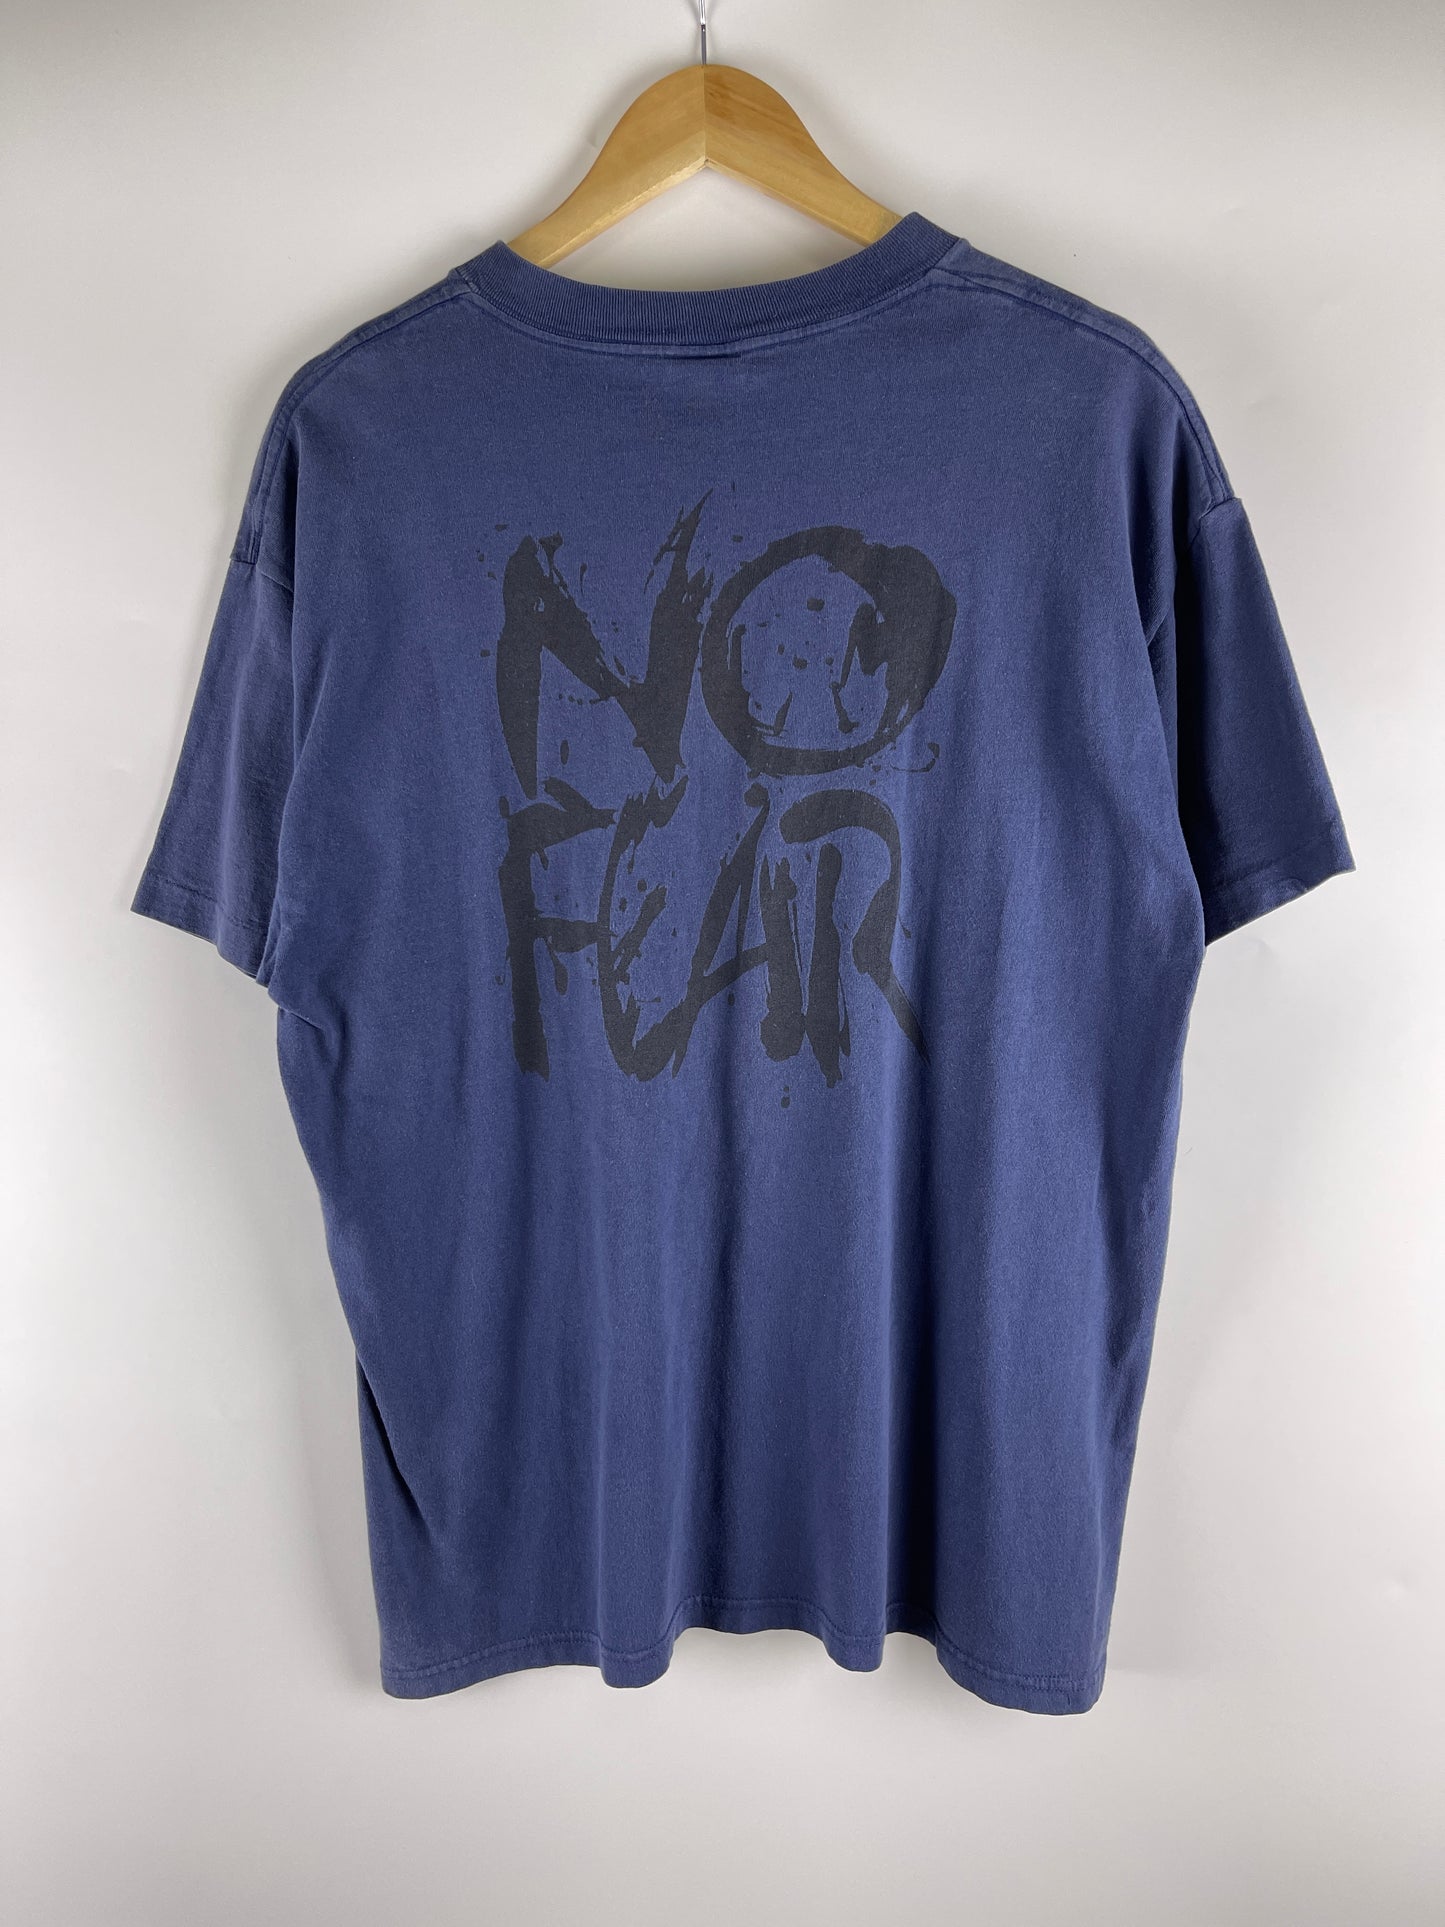 Vintage No Fear 90's Made in USA Skateboard T-shirt